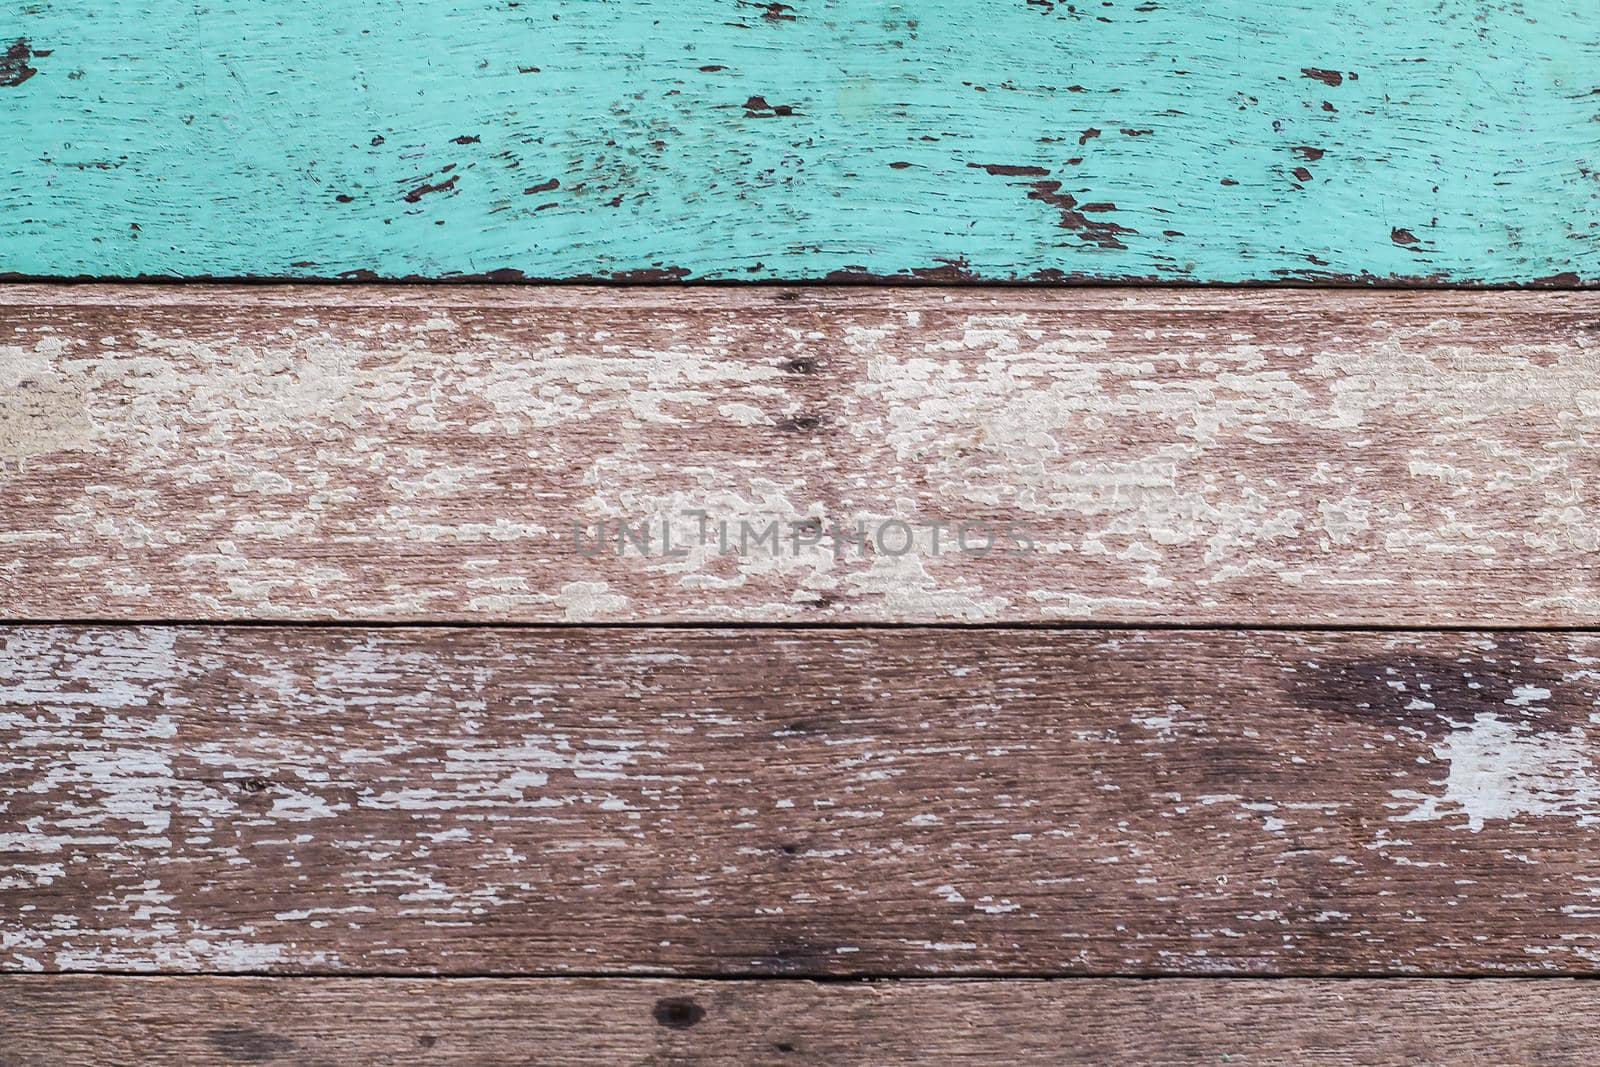 Vintage wood background with peeling paint. Vintage beach wood background - Old weathered wooden plank painted